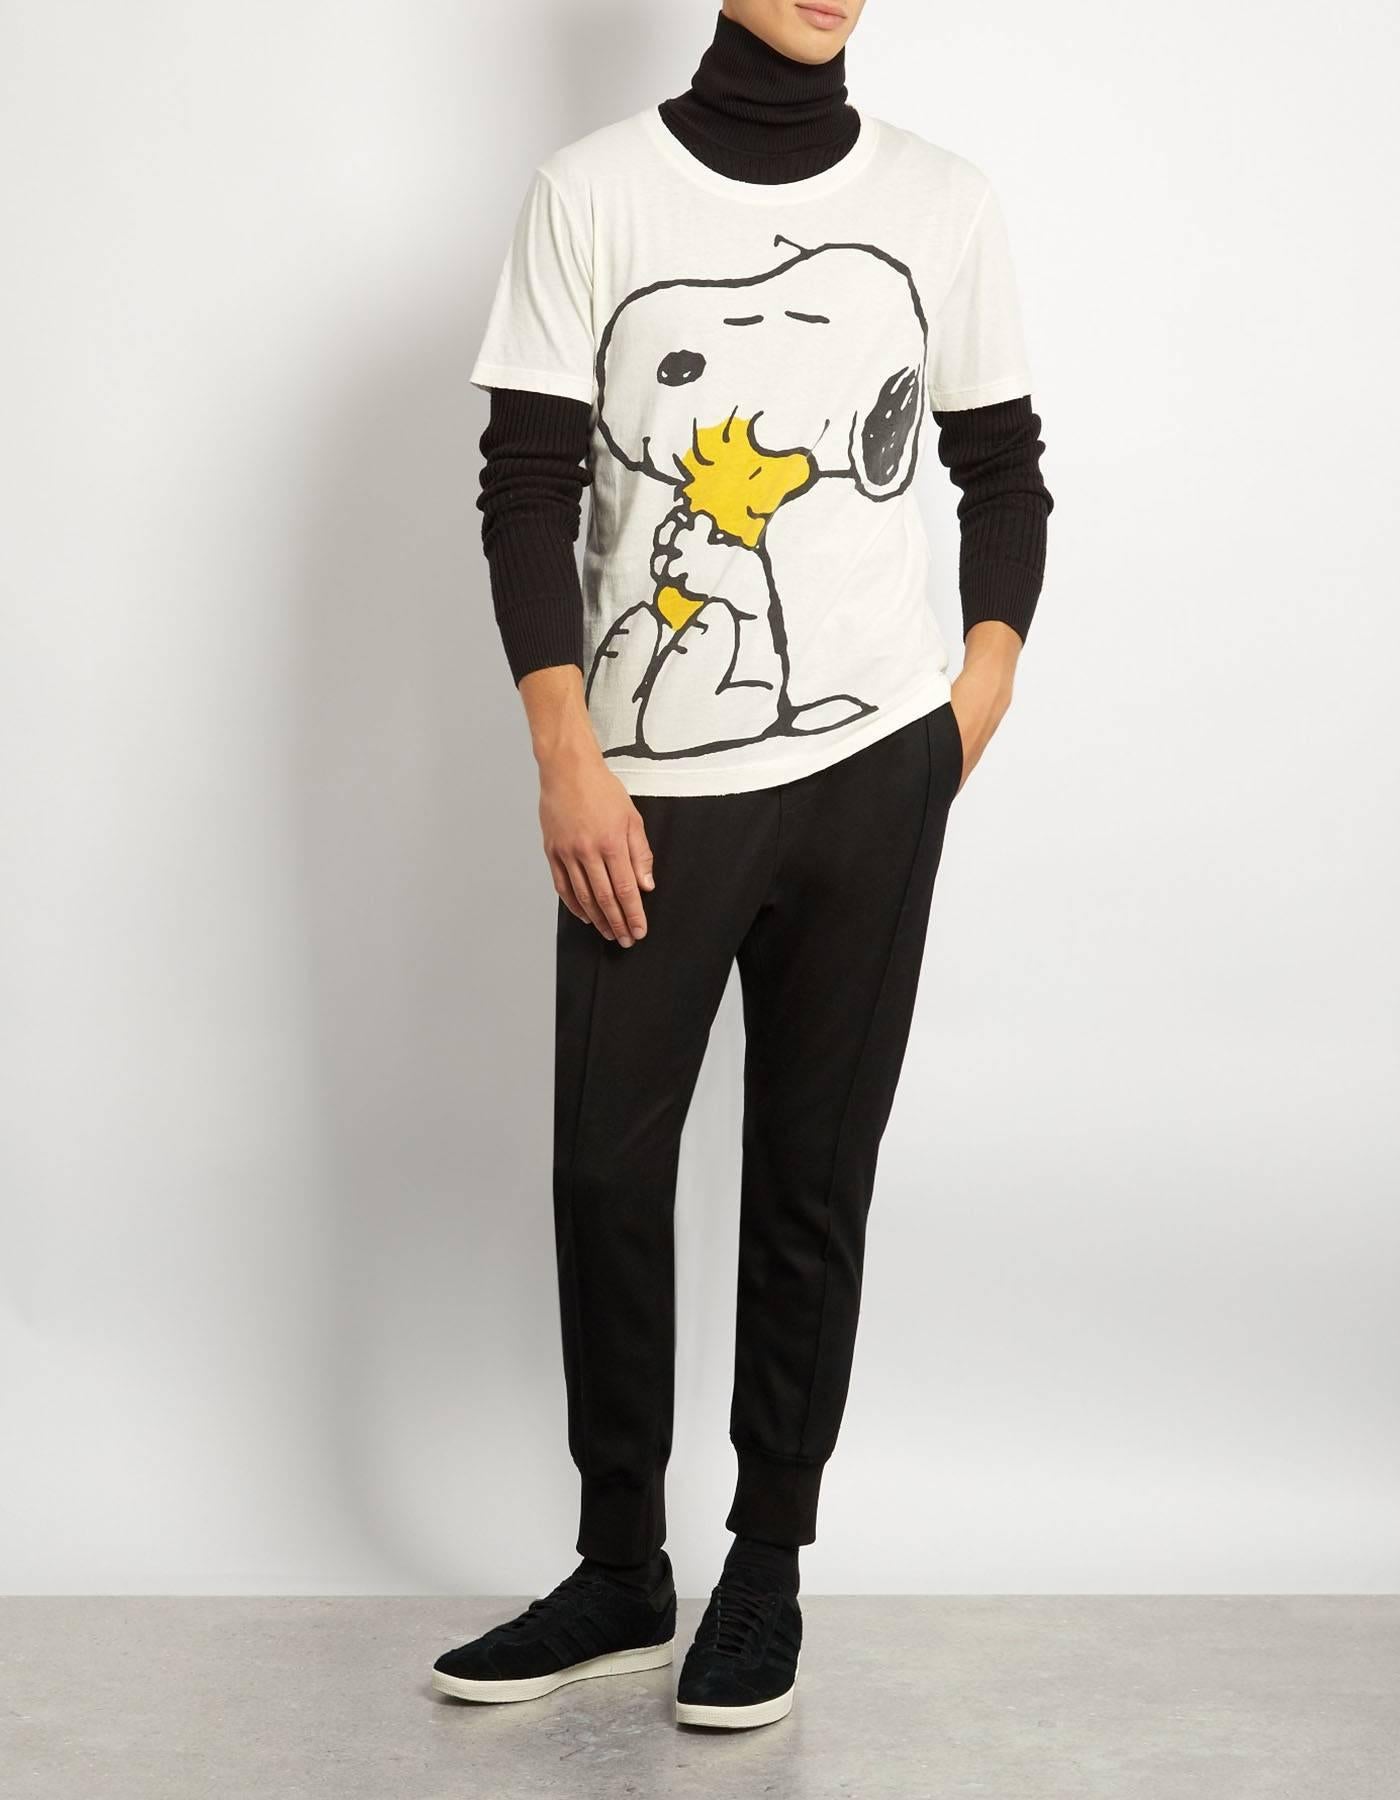 Snoopy Gucci - For Sale on 1stDibs | gucci snoopy bag, gucci cartoon  characters, gucci snoopy